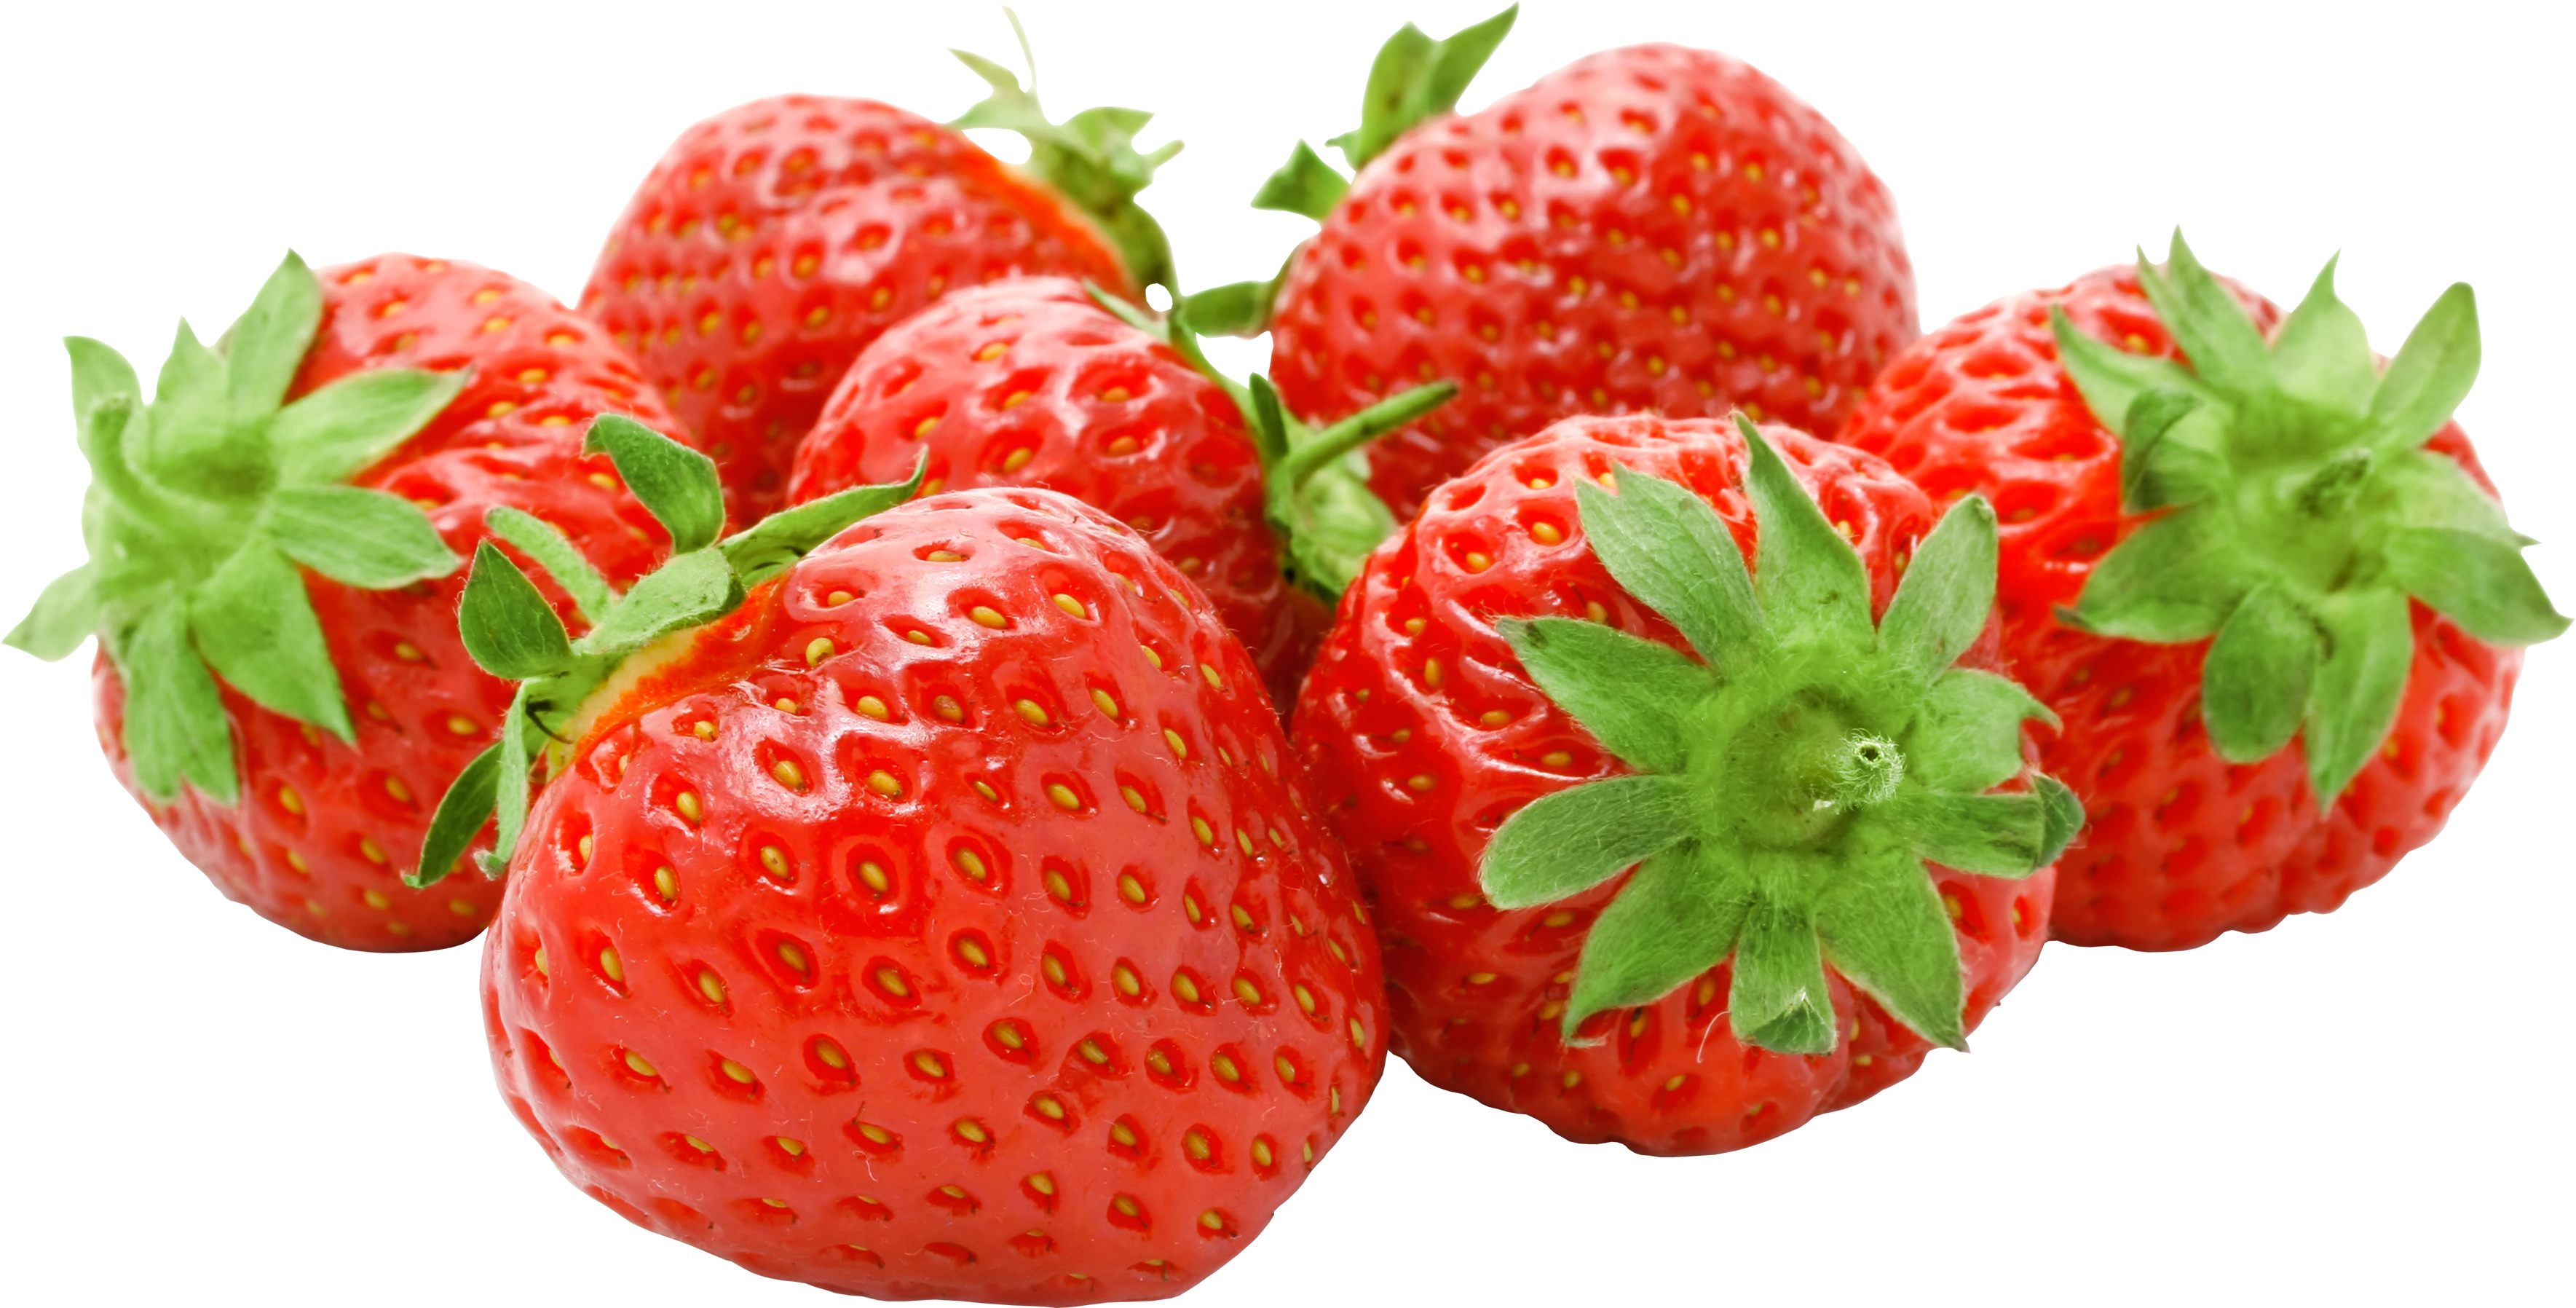 Many strawberries PNG image